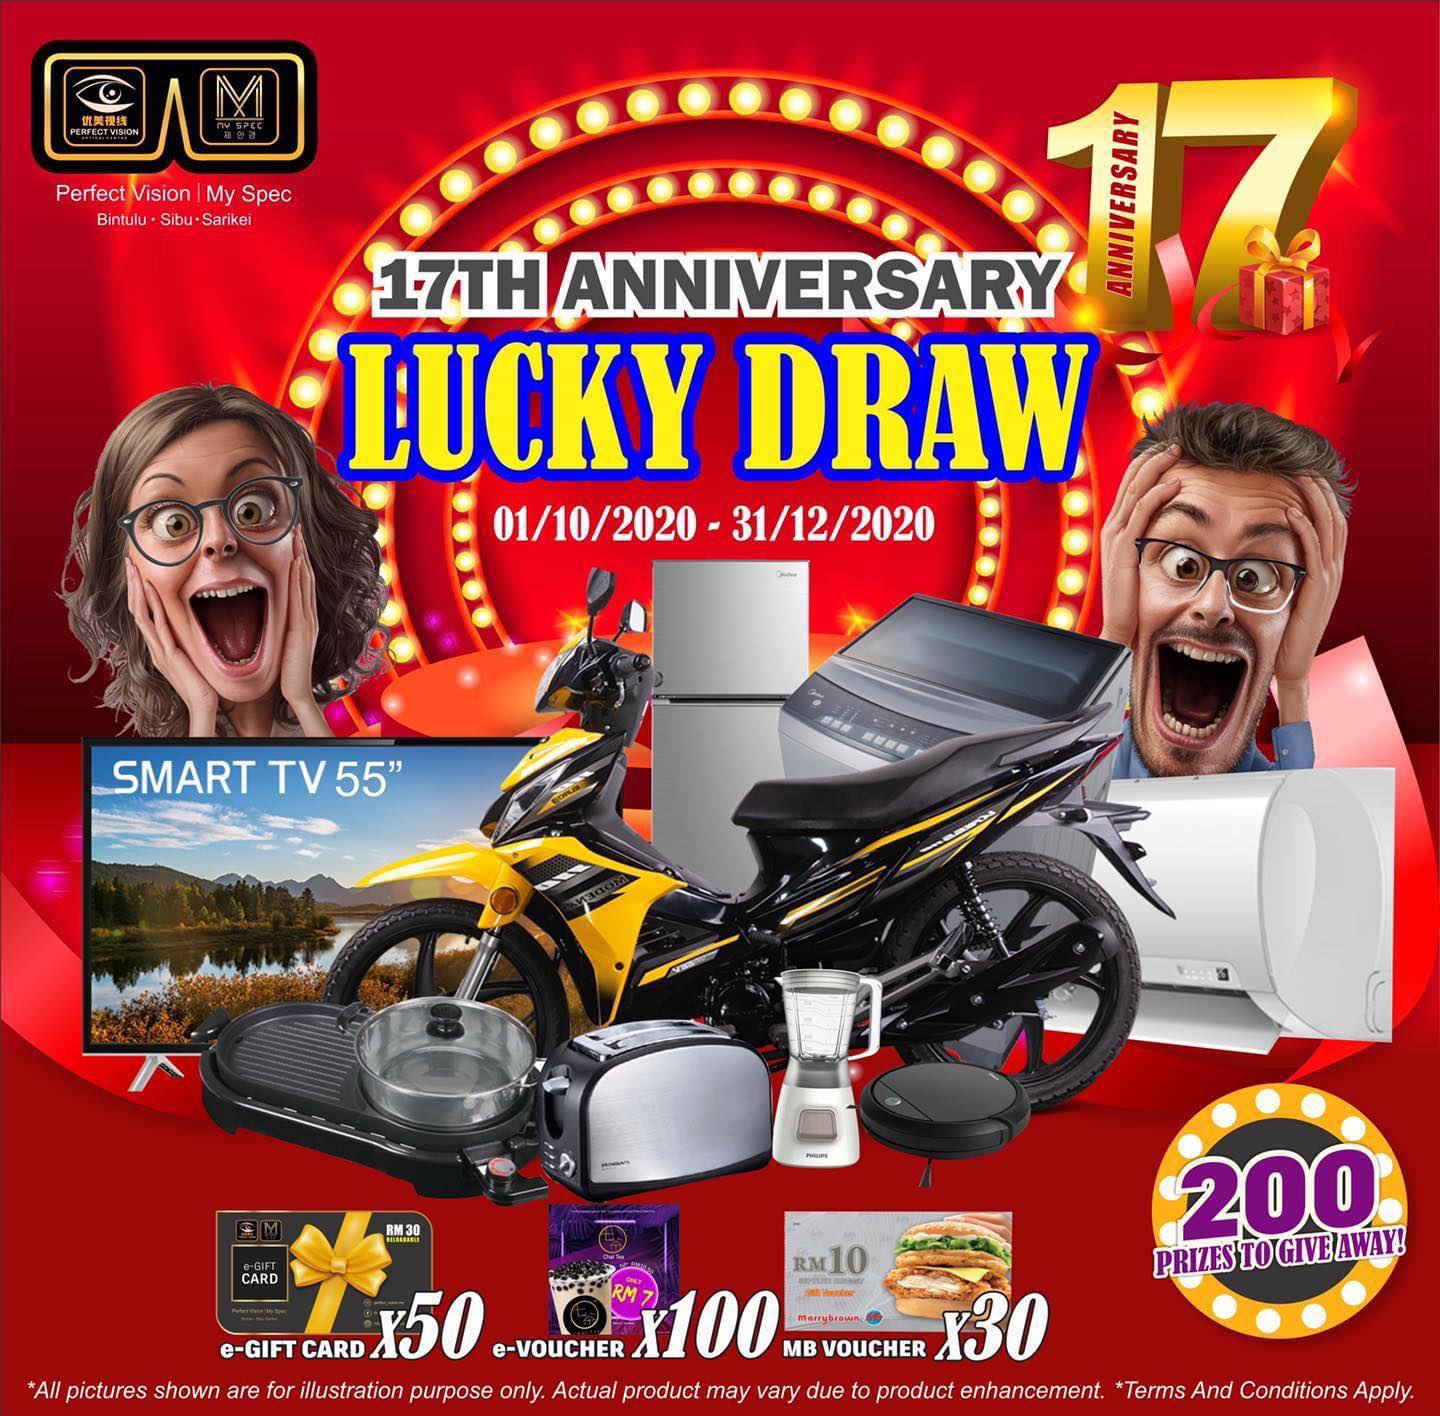 Copy of Copy of Copy of Copy of Lucky Draw Flyer - Made with PosterMyWall  (1)